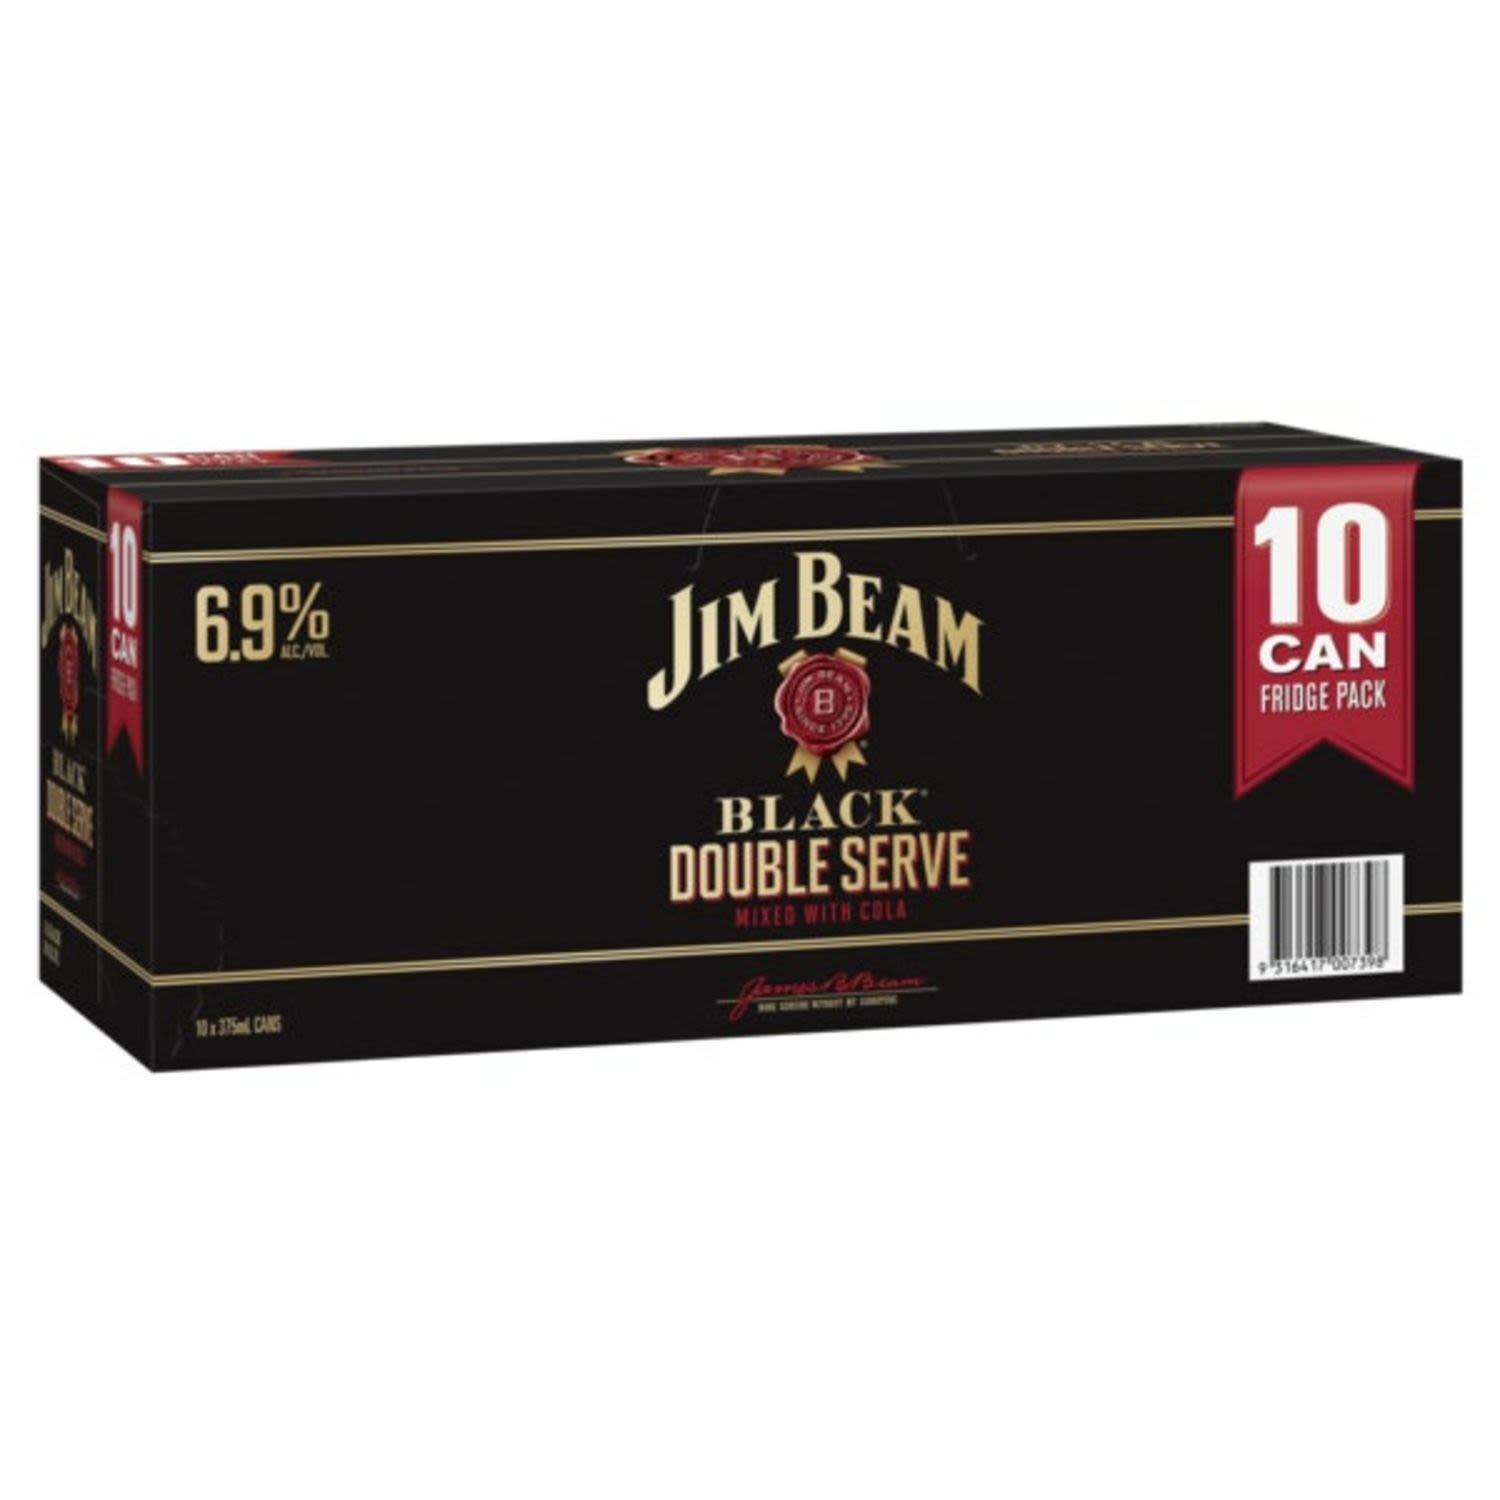 Jim Beam Black Double Serve delivers two servings of the premium, extra-aged Jim Beam Black Bourbon you love, pre-mixed with quality cola.<br /> <br />Alcohol Volume: 6.90%<br /><br />Pack Format: 10 Pack<br /><br />Standard Drinks: 2.1</br /><br />Pack Type: Can<br />